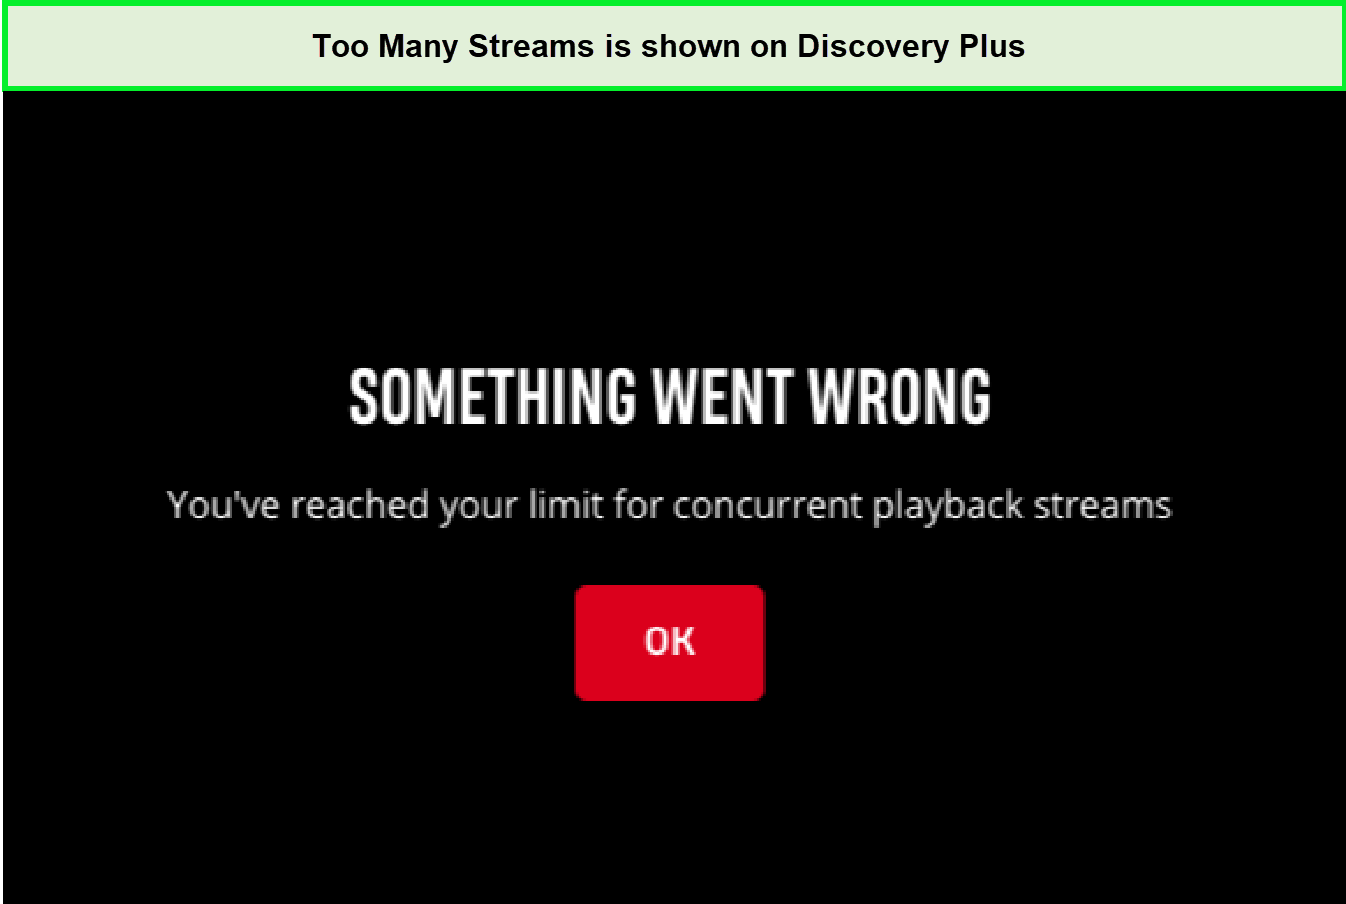 discovery-plus-too-many-streams-error-in-India